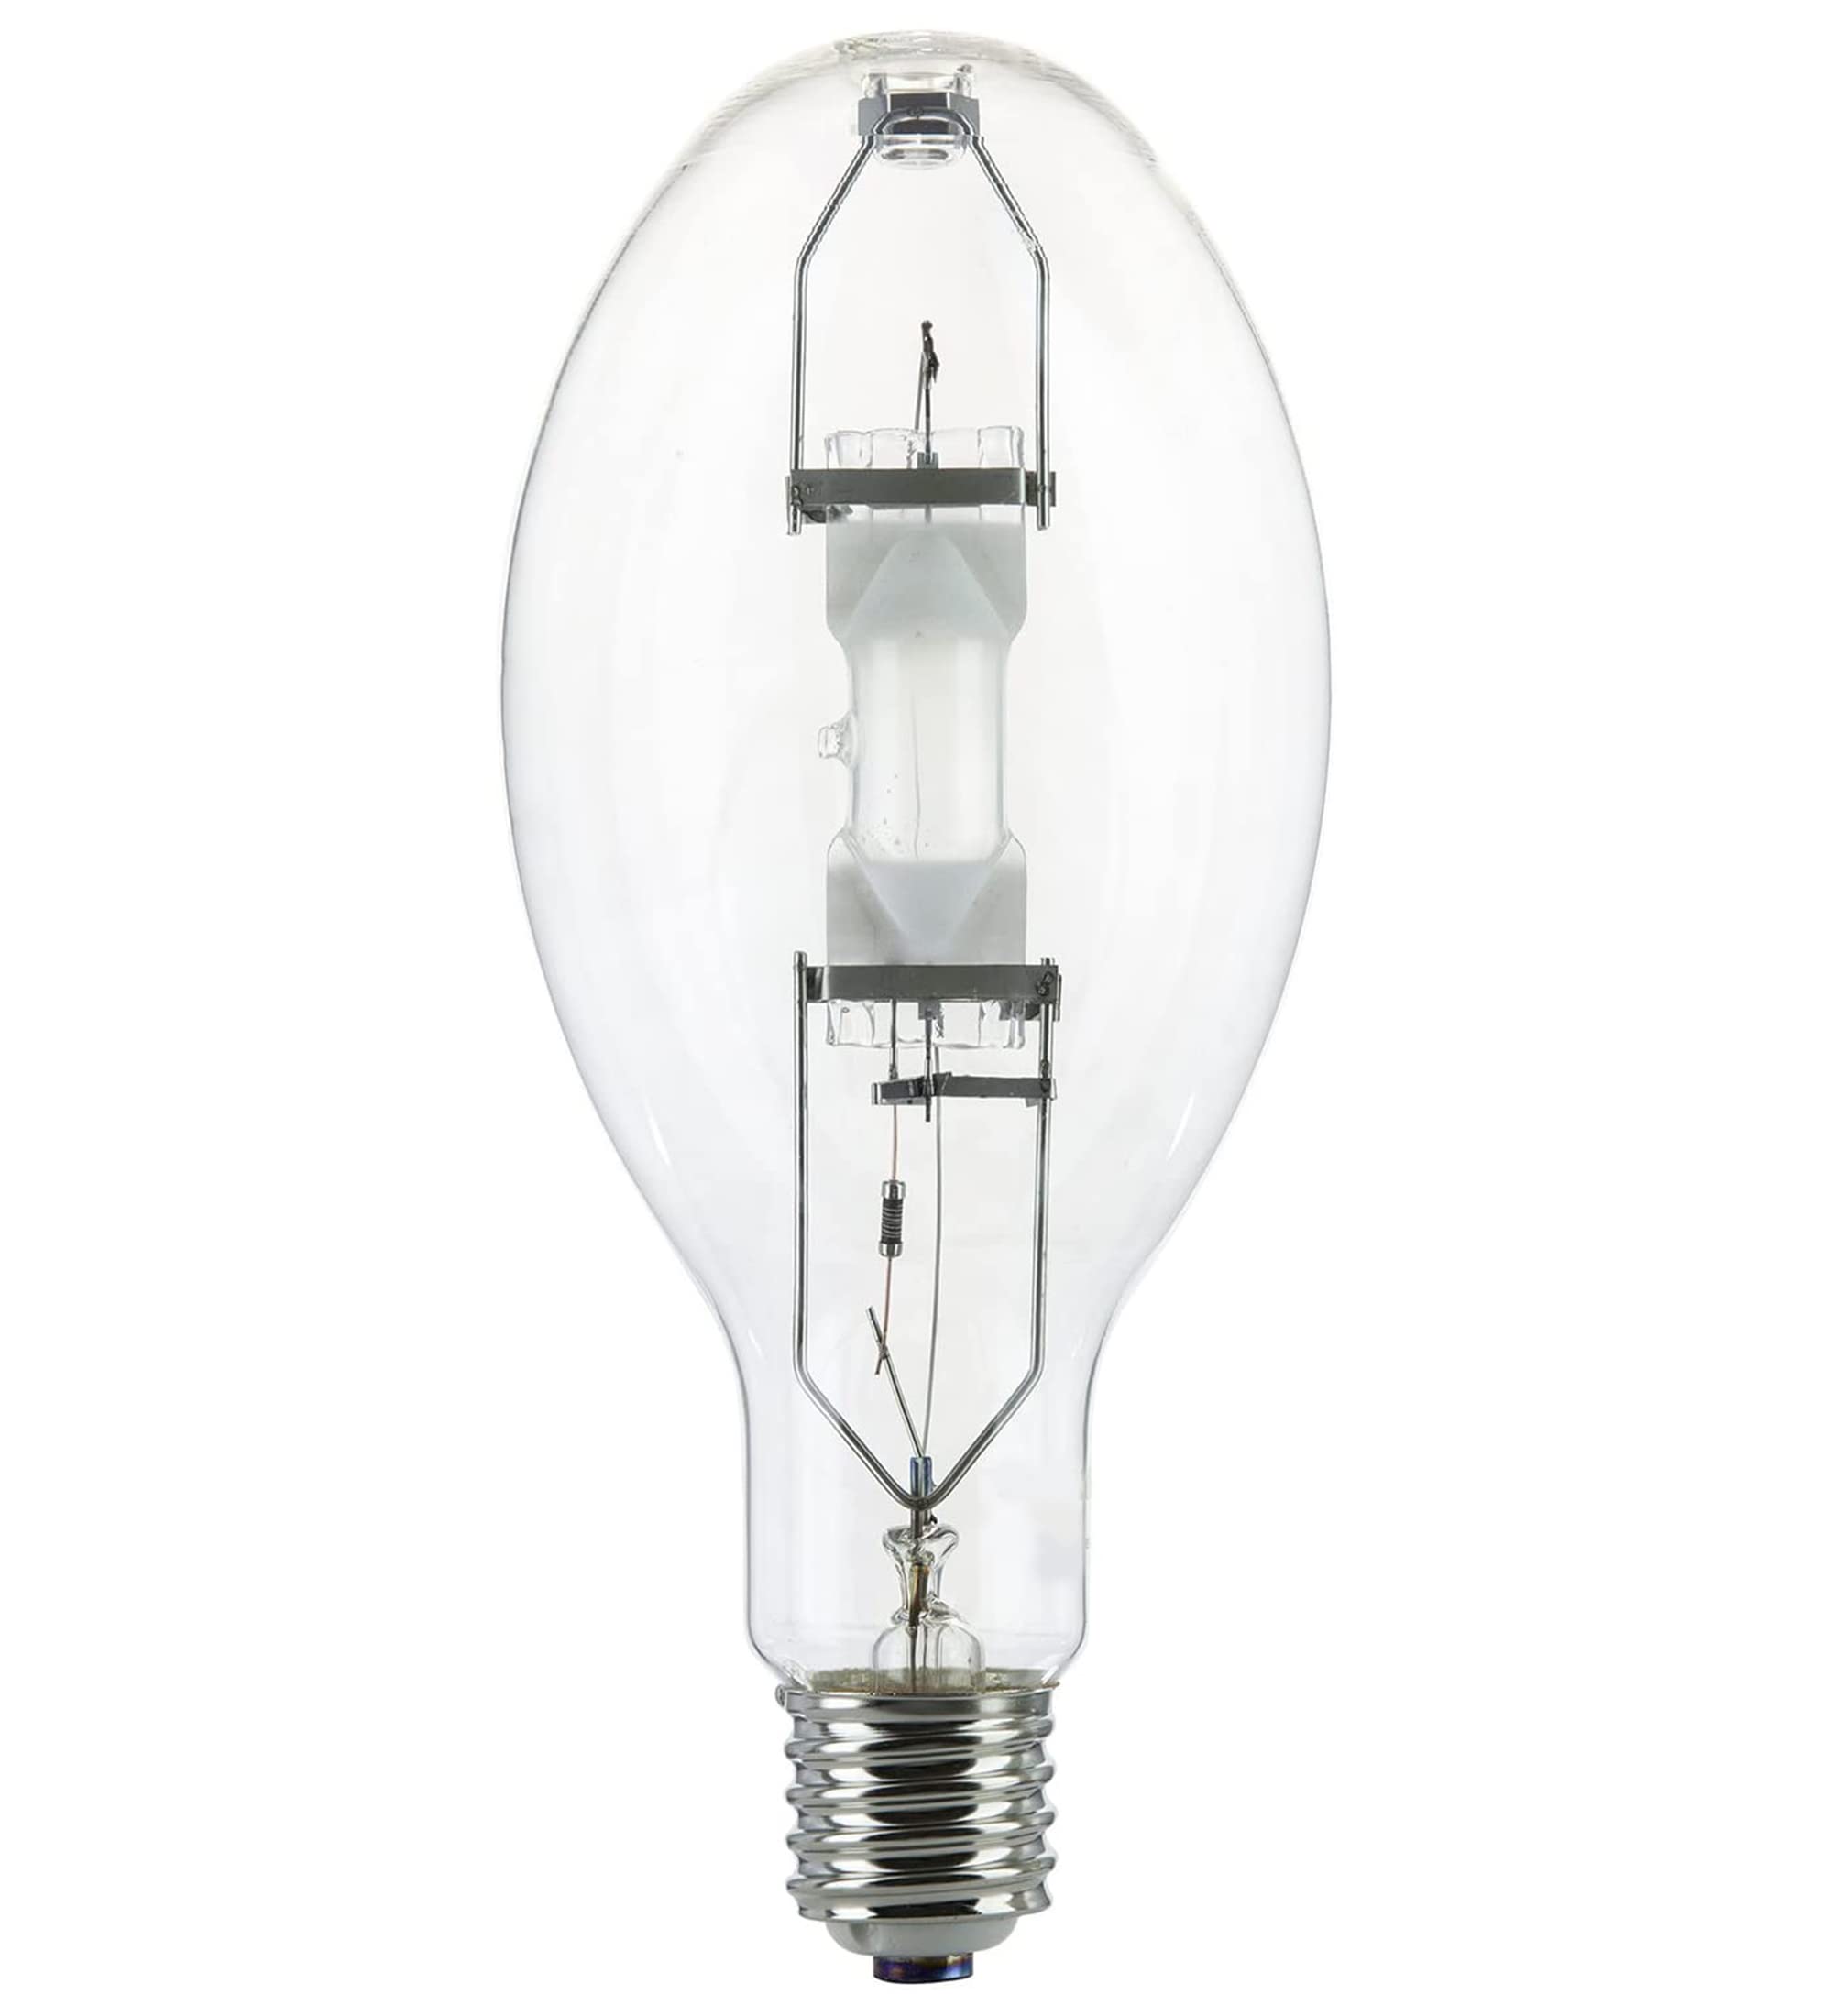 Ciata High-Intensity Discharge Lamps, 65 CRI, 4000K Cool White, E39 Mogul Base, 10000 Life Hours Metal Halide Lamps in Clear Finish for Commercial and Industrial Applications